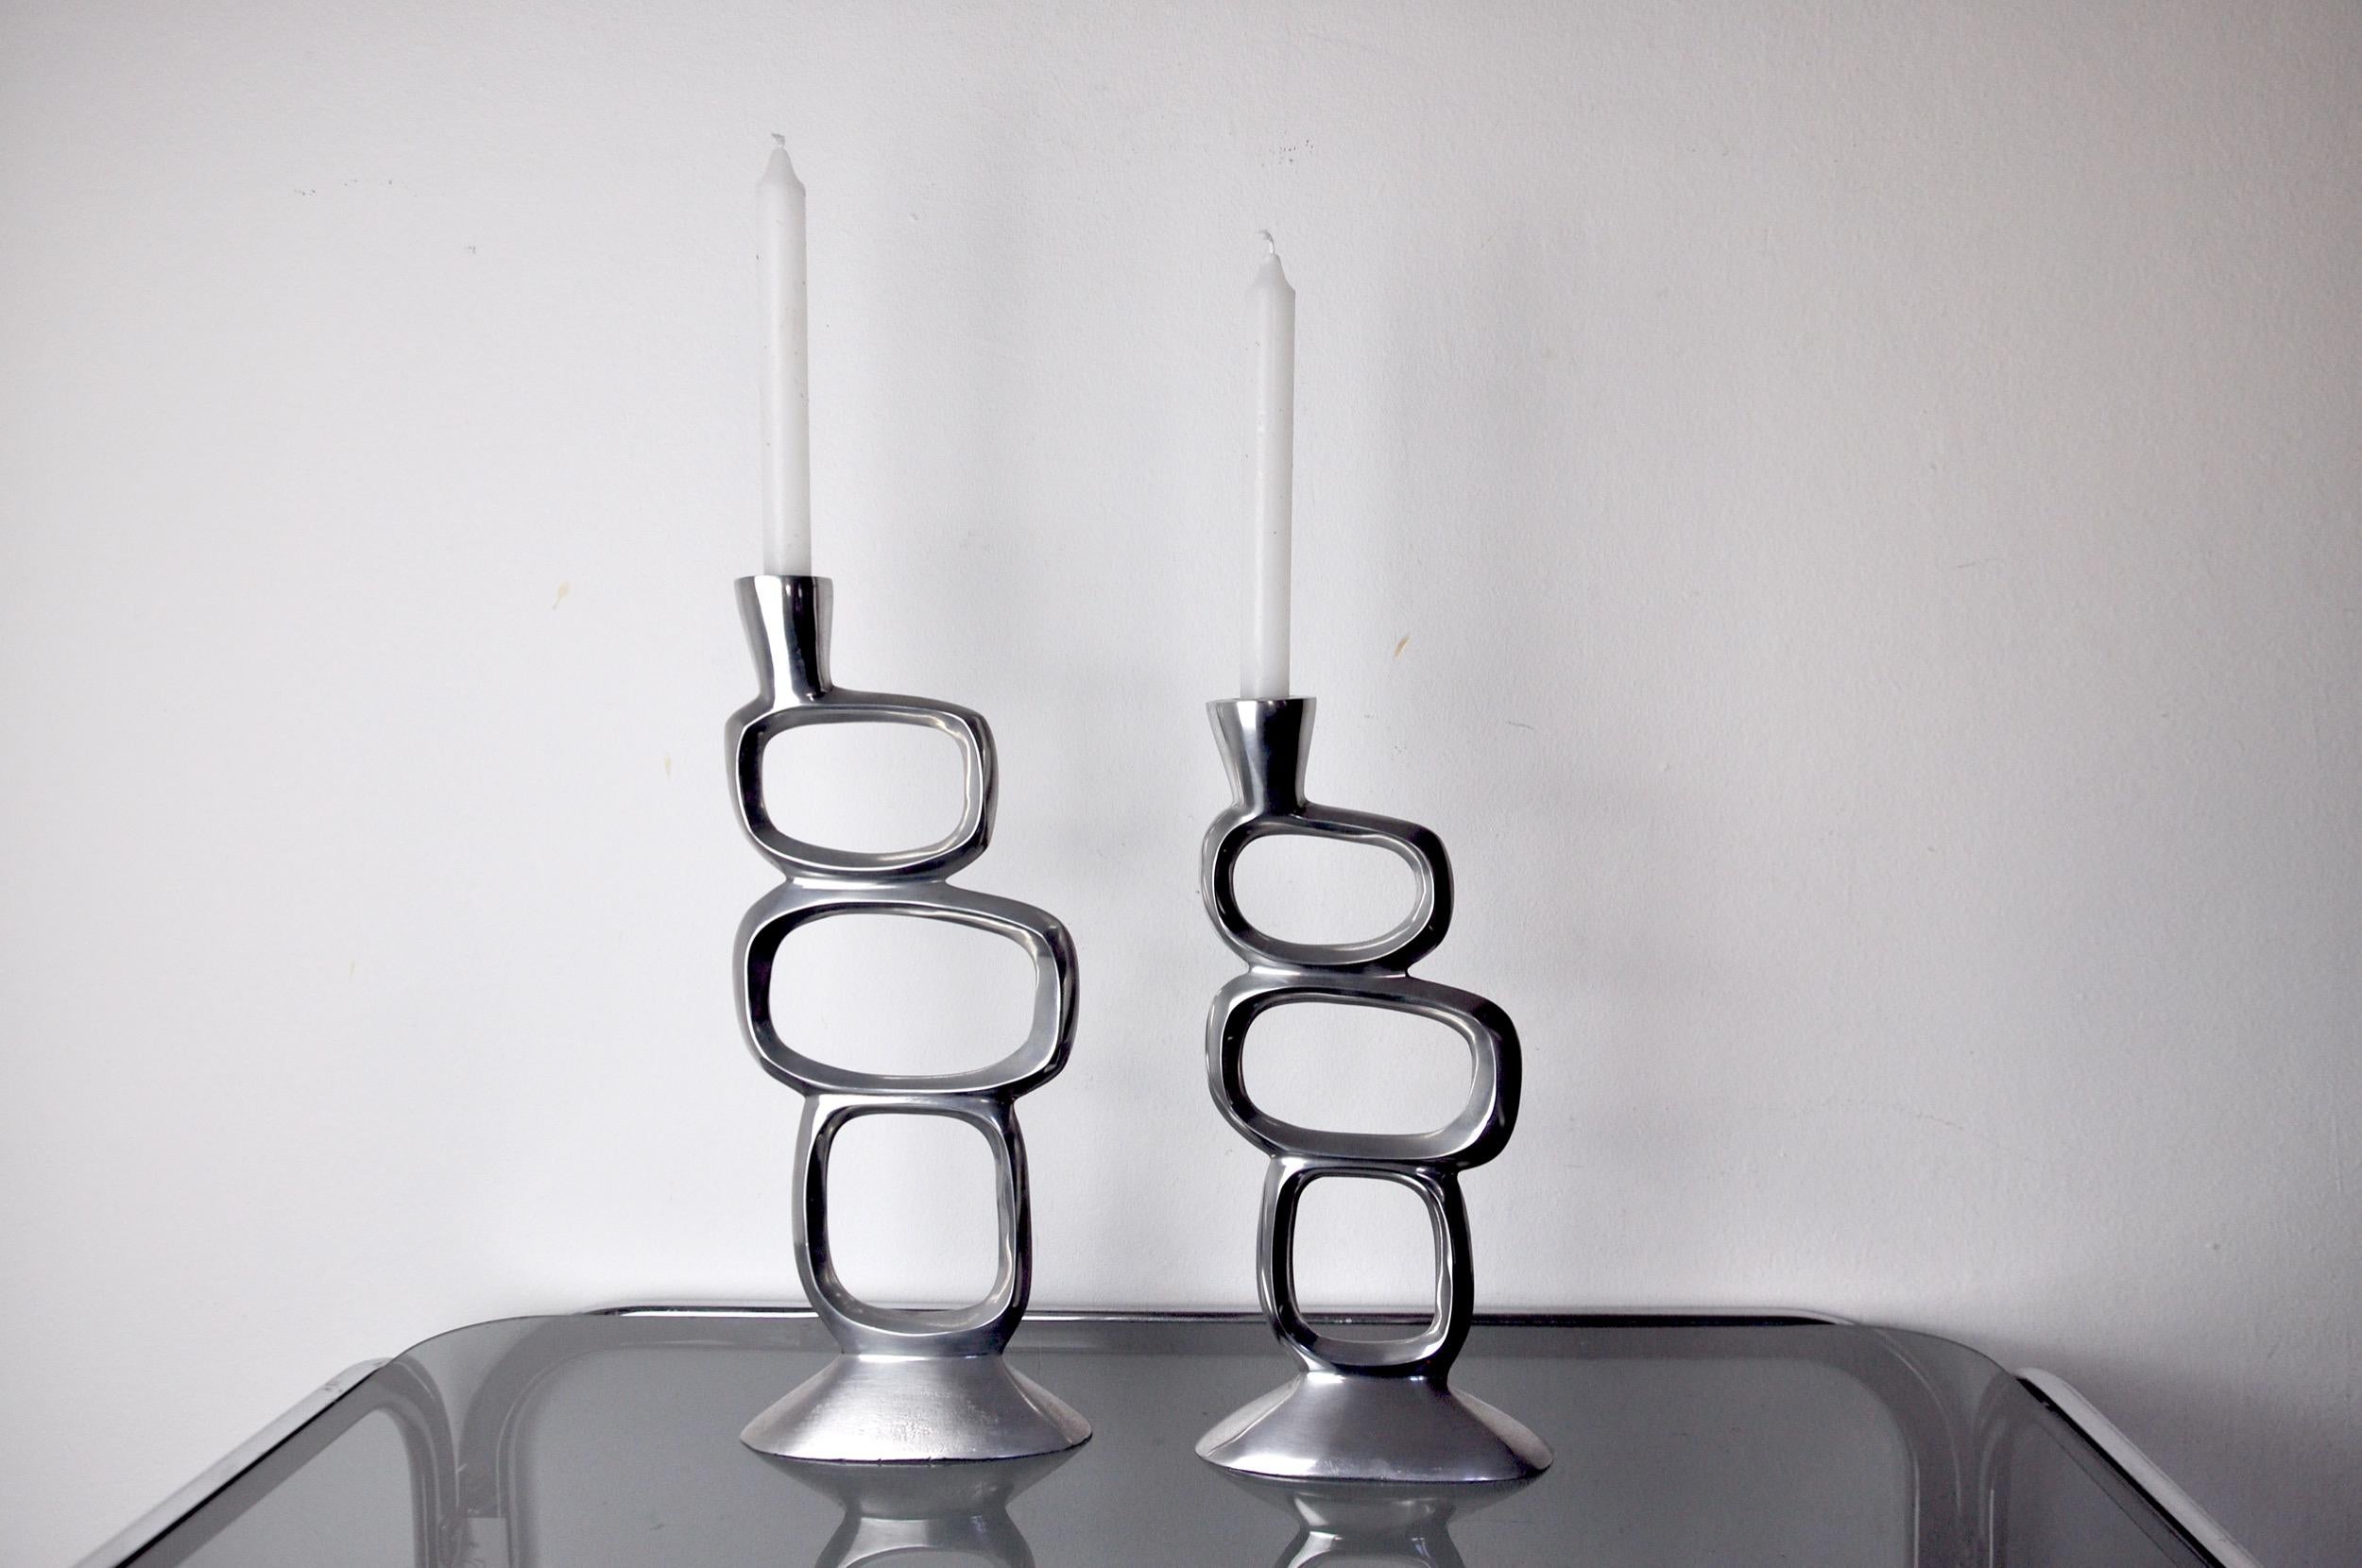 Pair of circle candlesticks designed and produced by Matthew Hilton in england in the 1980s.

Set of two Brutalist-style aluminum candle holders.

Beautiful decorative objects that will bring a real design touch to your interior.

Very nice